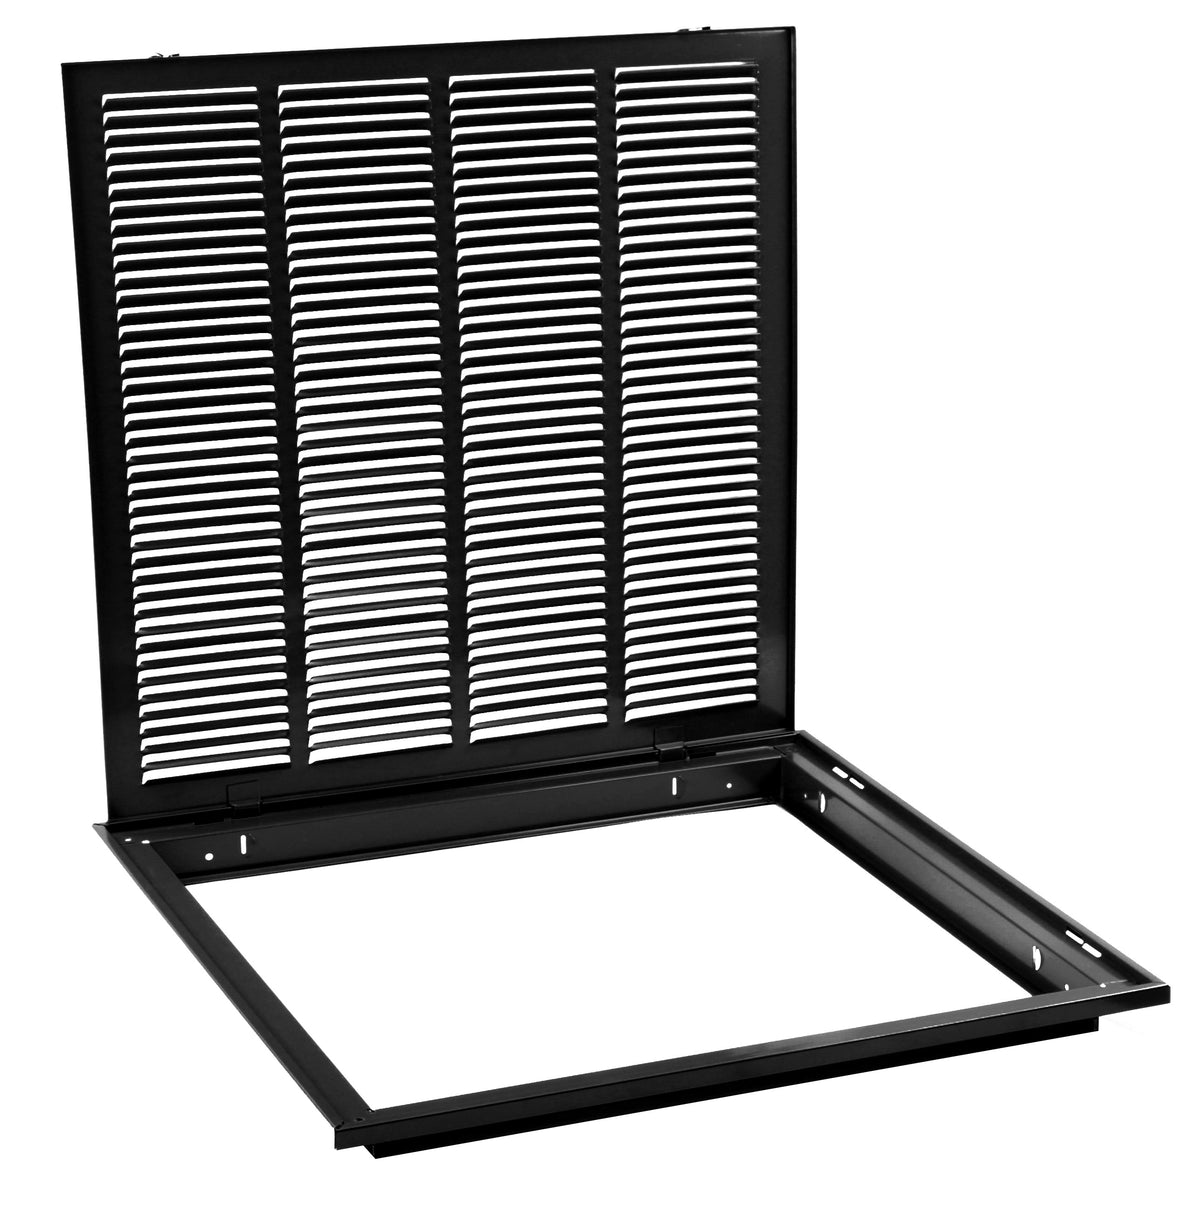 25&quot; X 25&quot; Steel Return Air Filter Grille for 1&quot; Filter - Removable Frame - Black - [Outer Dimensions: 27 5/8&quot; X 27 5/8&quot;]